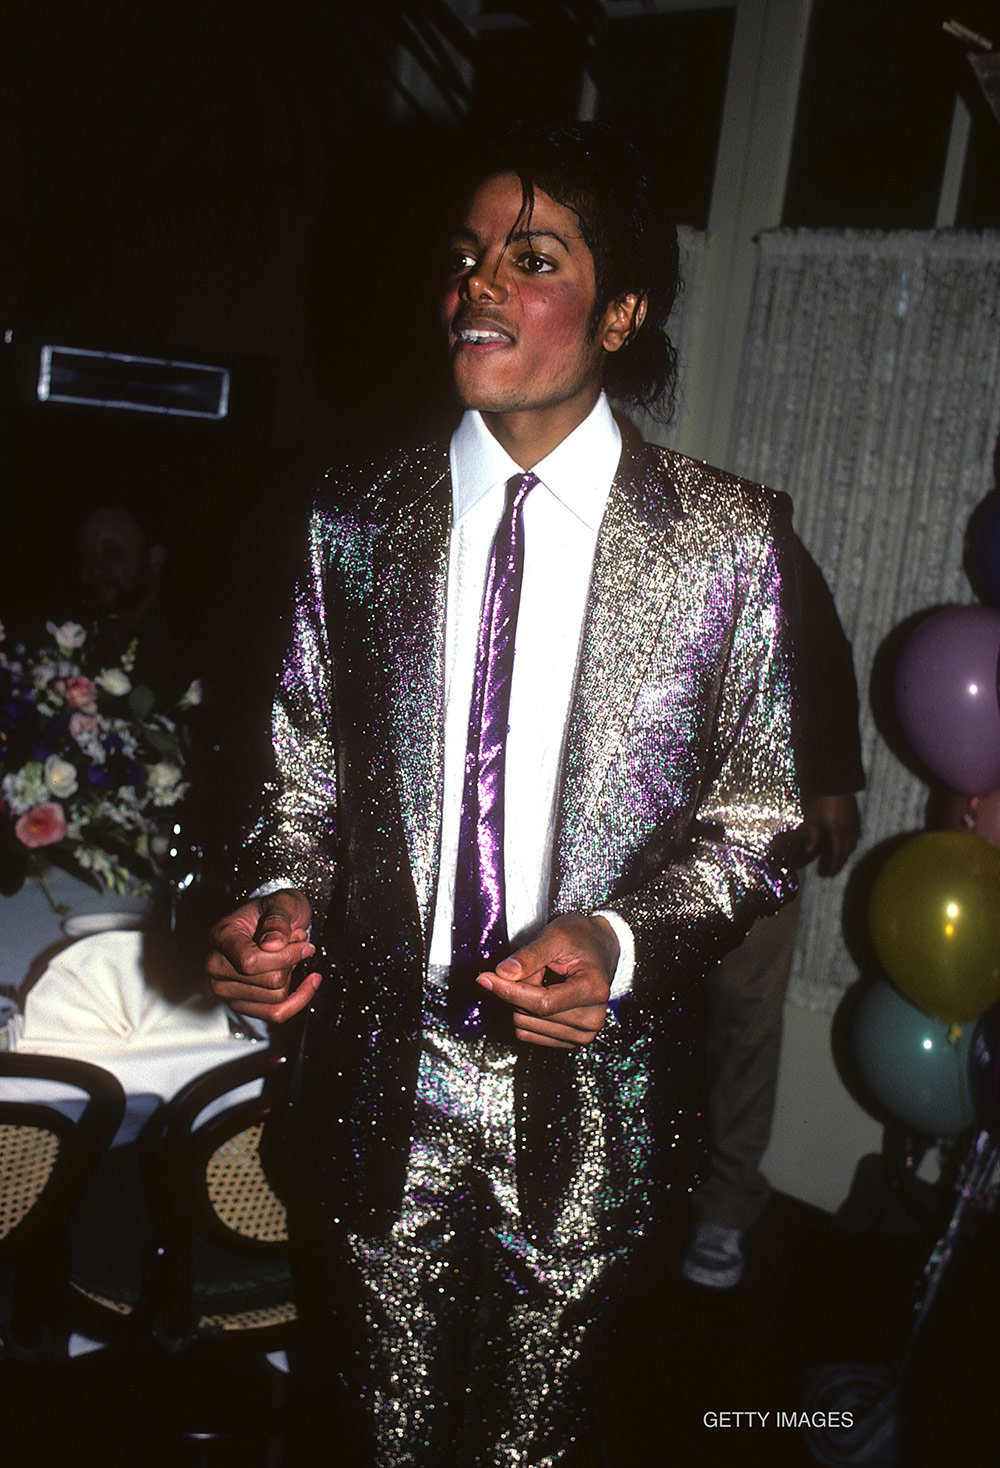 Michael Jackson attends his mother Katherine Jackson's birthday party May 4, 1984 in Los Angeles, California